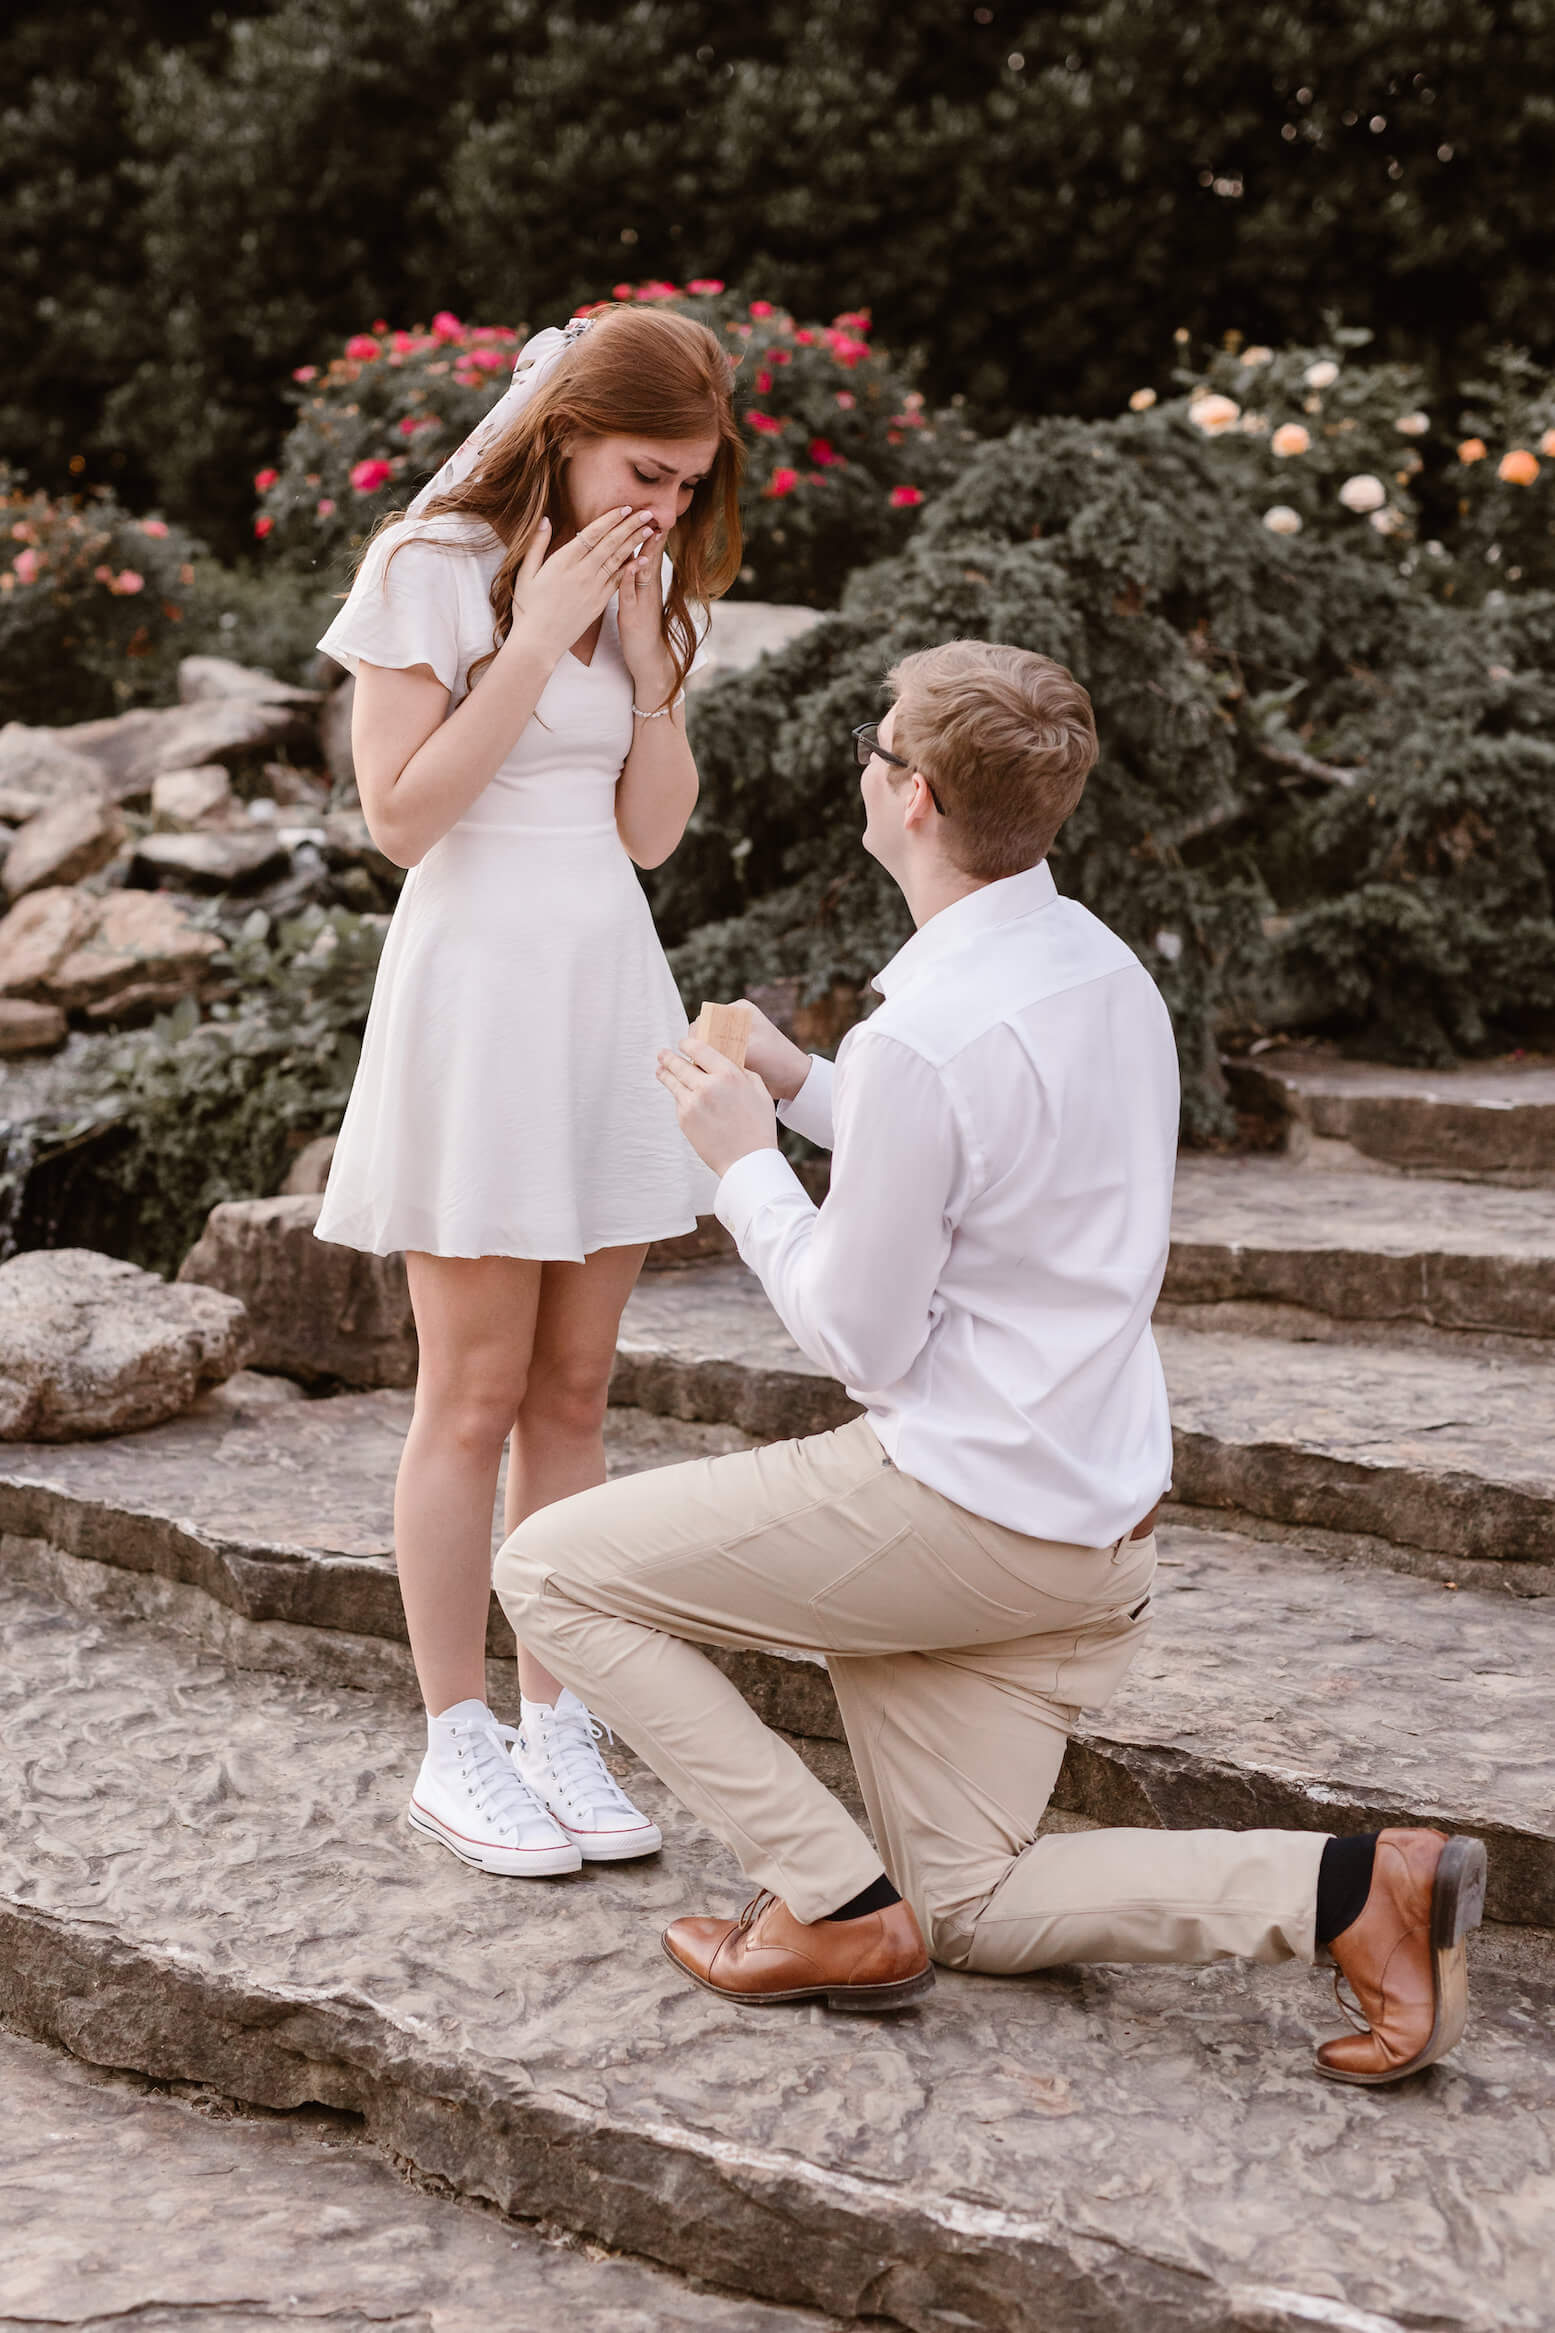 man proposing to woman in short white dress while holding ring box on one knee